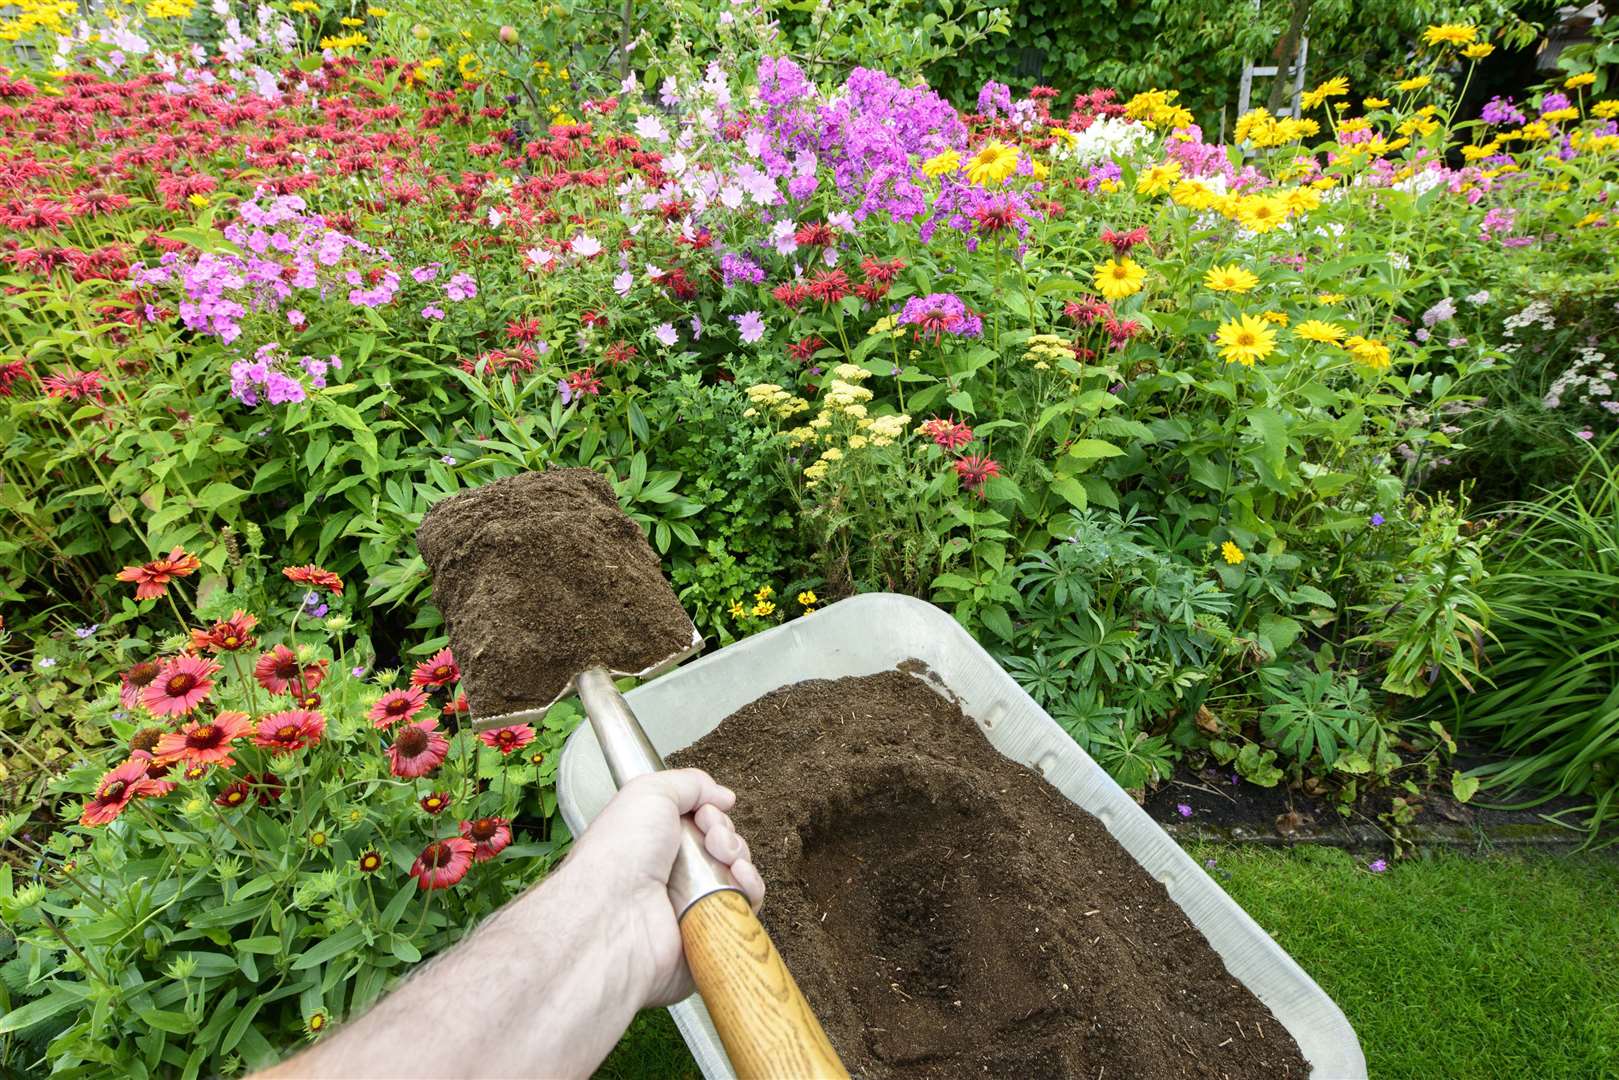 Use your own compost mix to flower beds bloom. Picture: iStock/PA